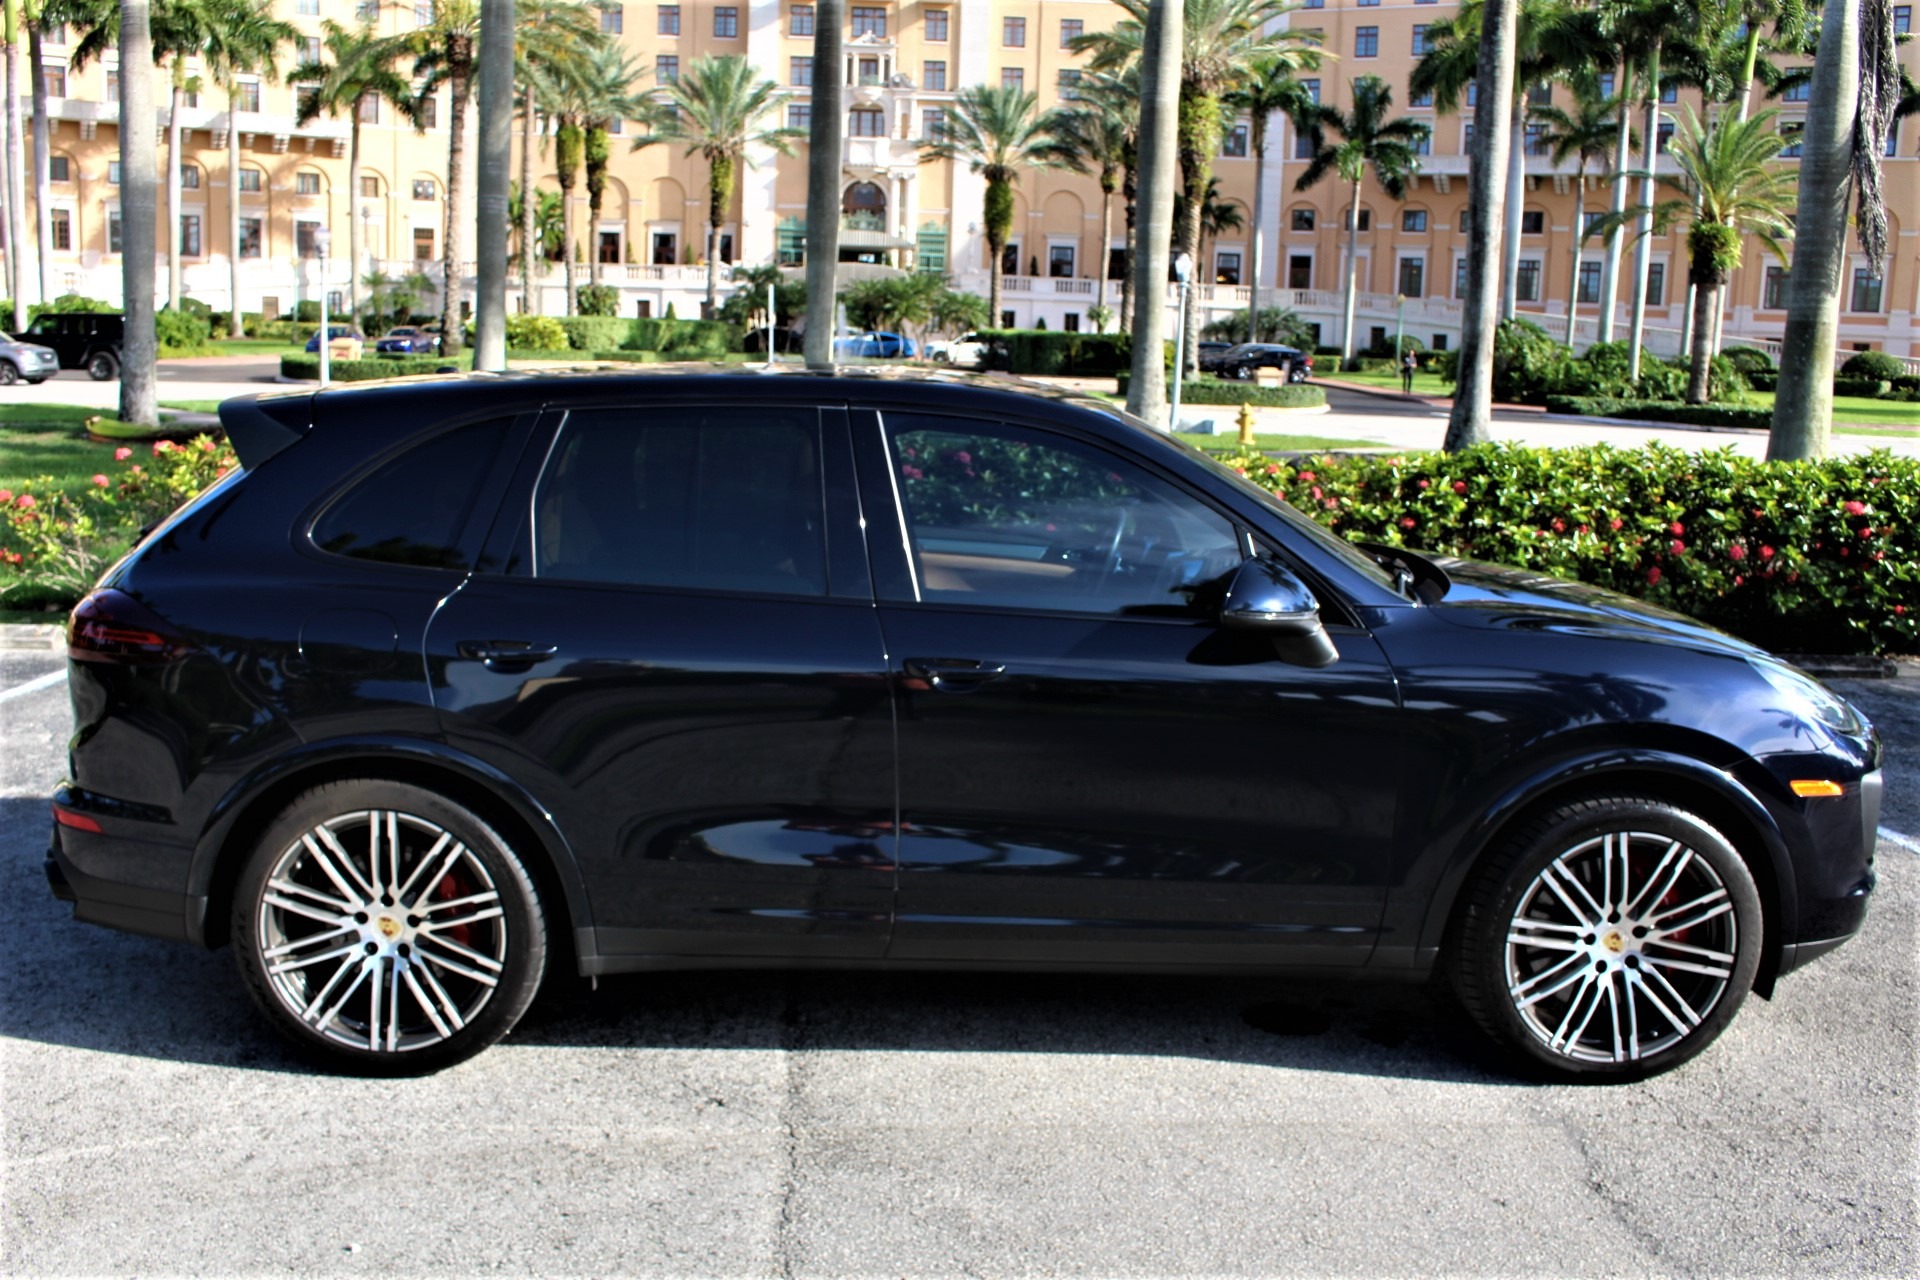 Used 2018 Porsche Cayenne Turbo for sale Sold at The Gables Sports Cars in Miami FL 33146 2